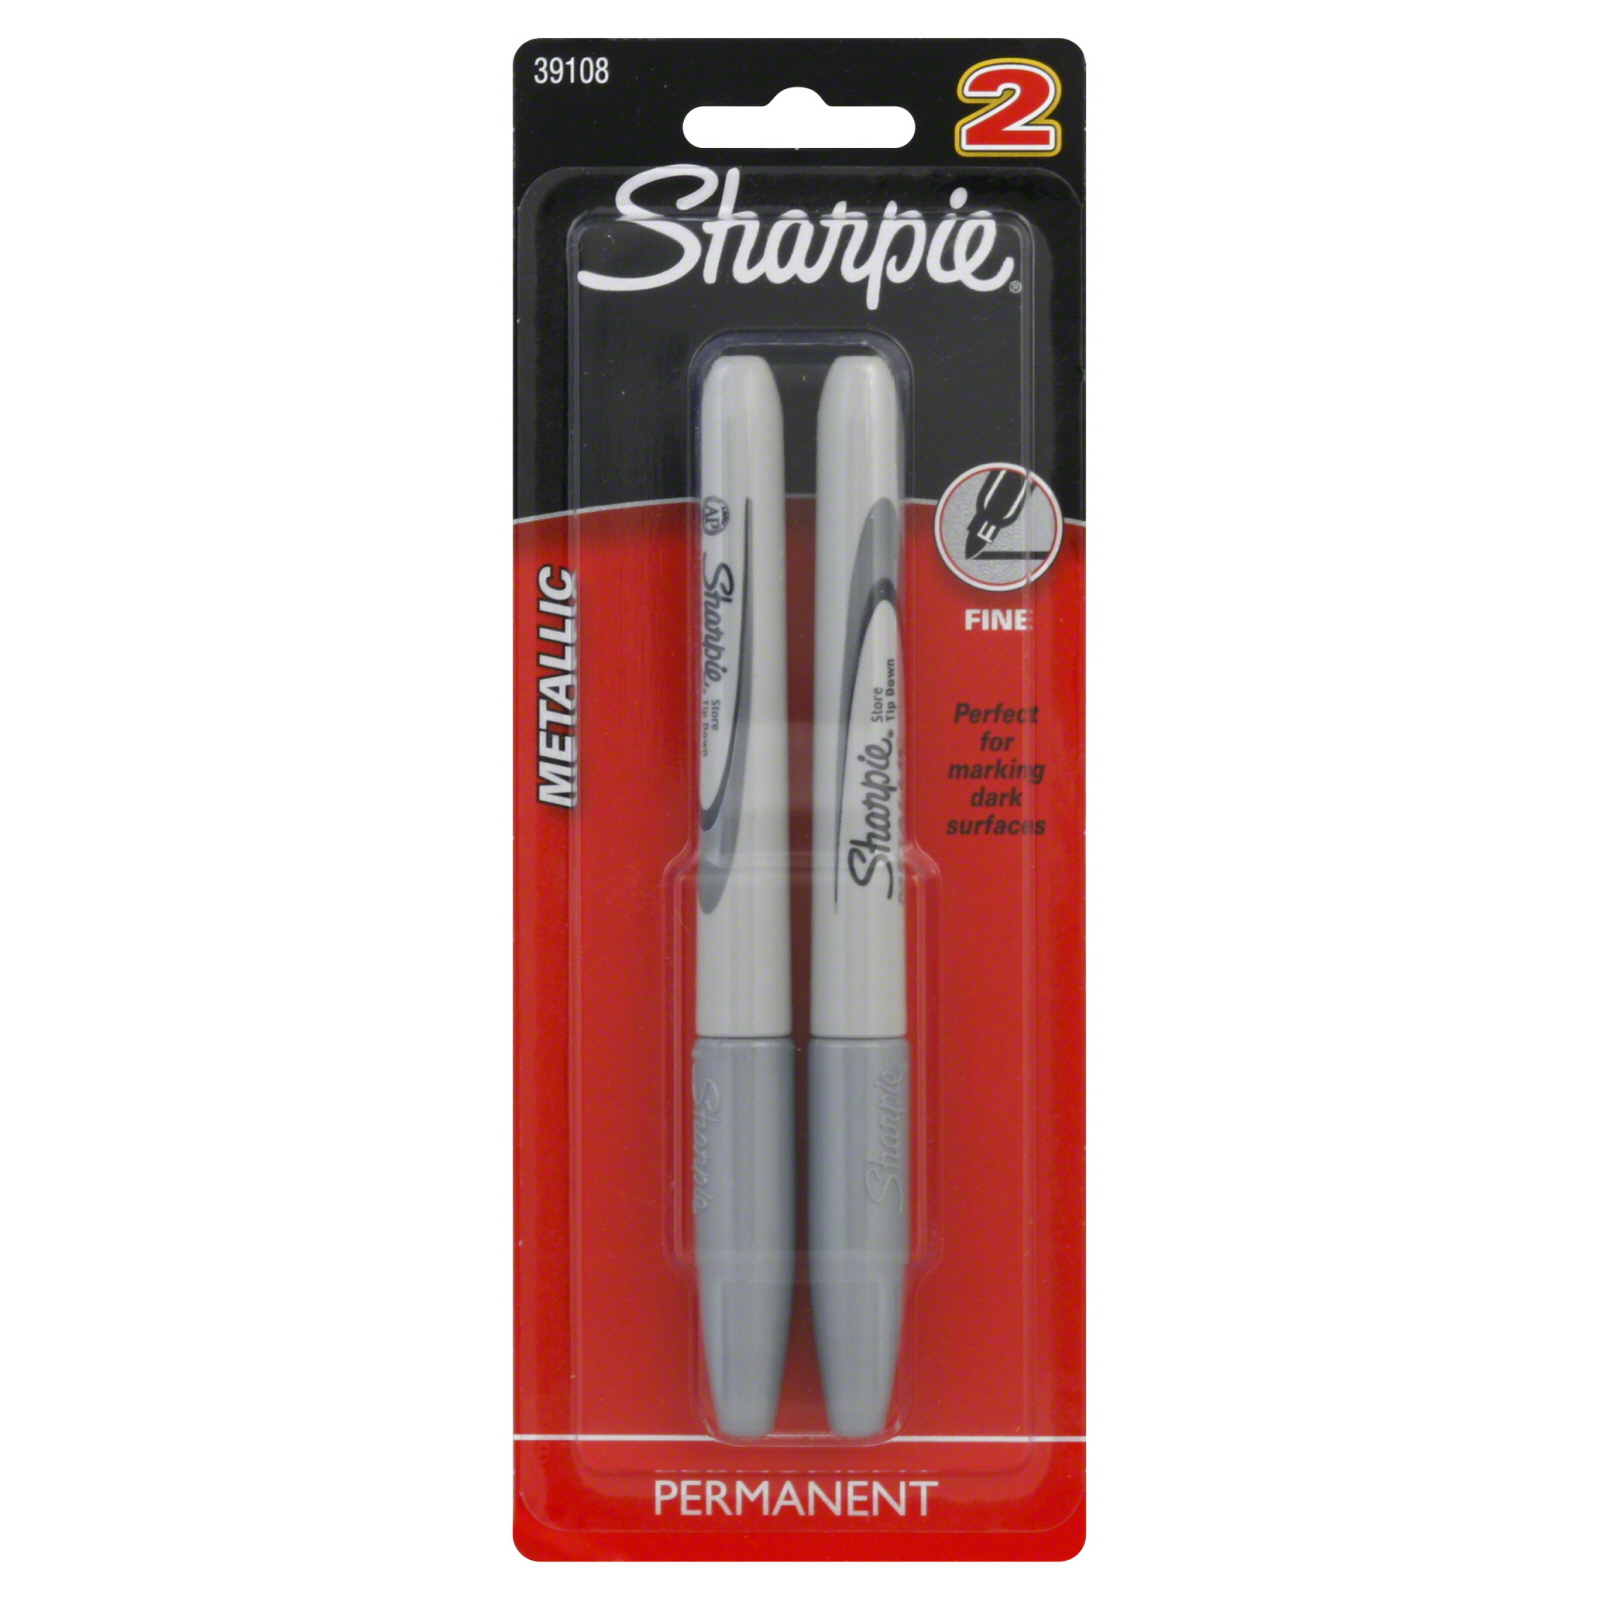 39108 for sale online Sharpie Metallic Silver Fine Point Permanent Markers Silver Ink 2 Pack